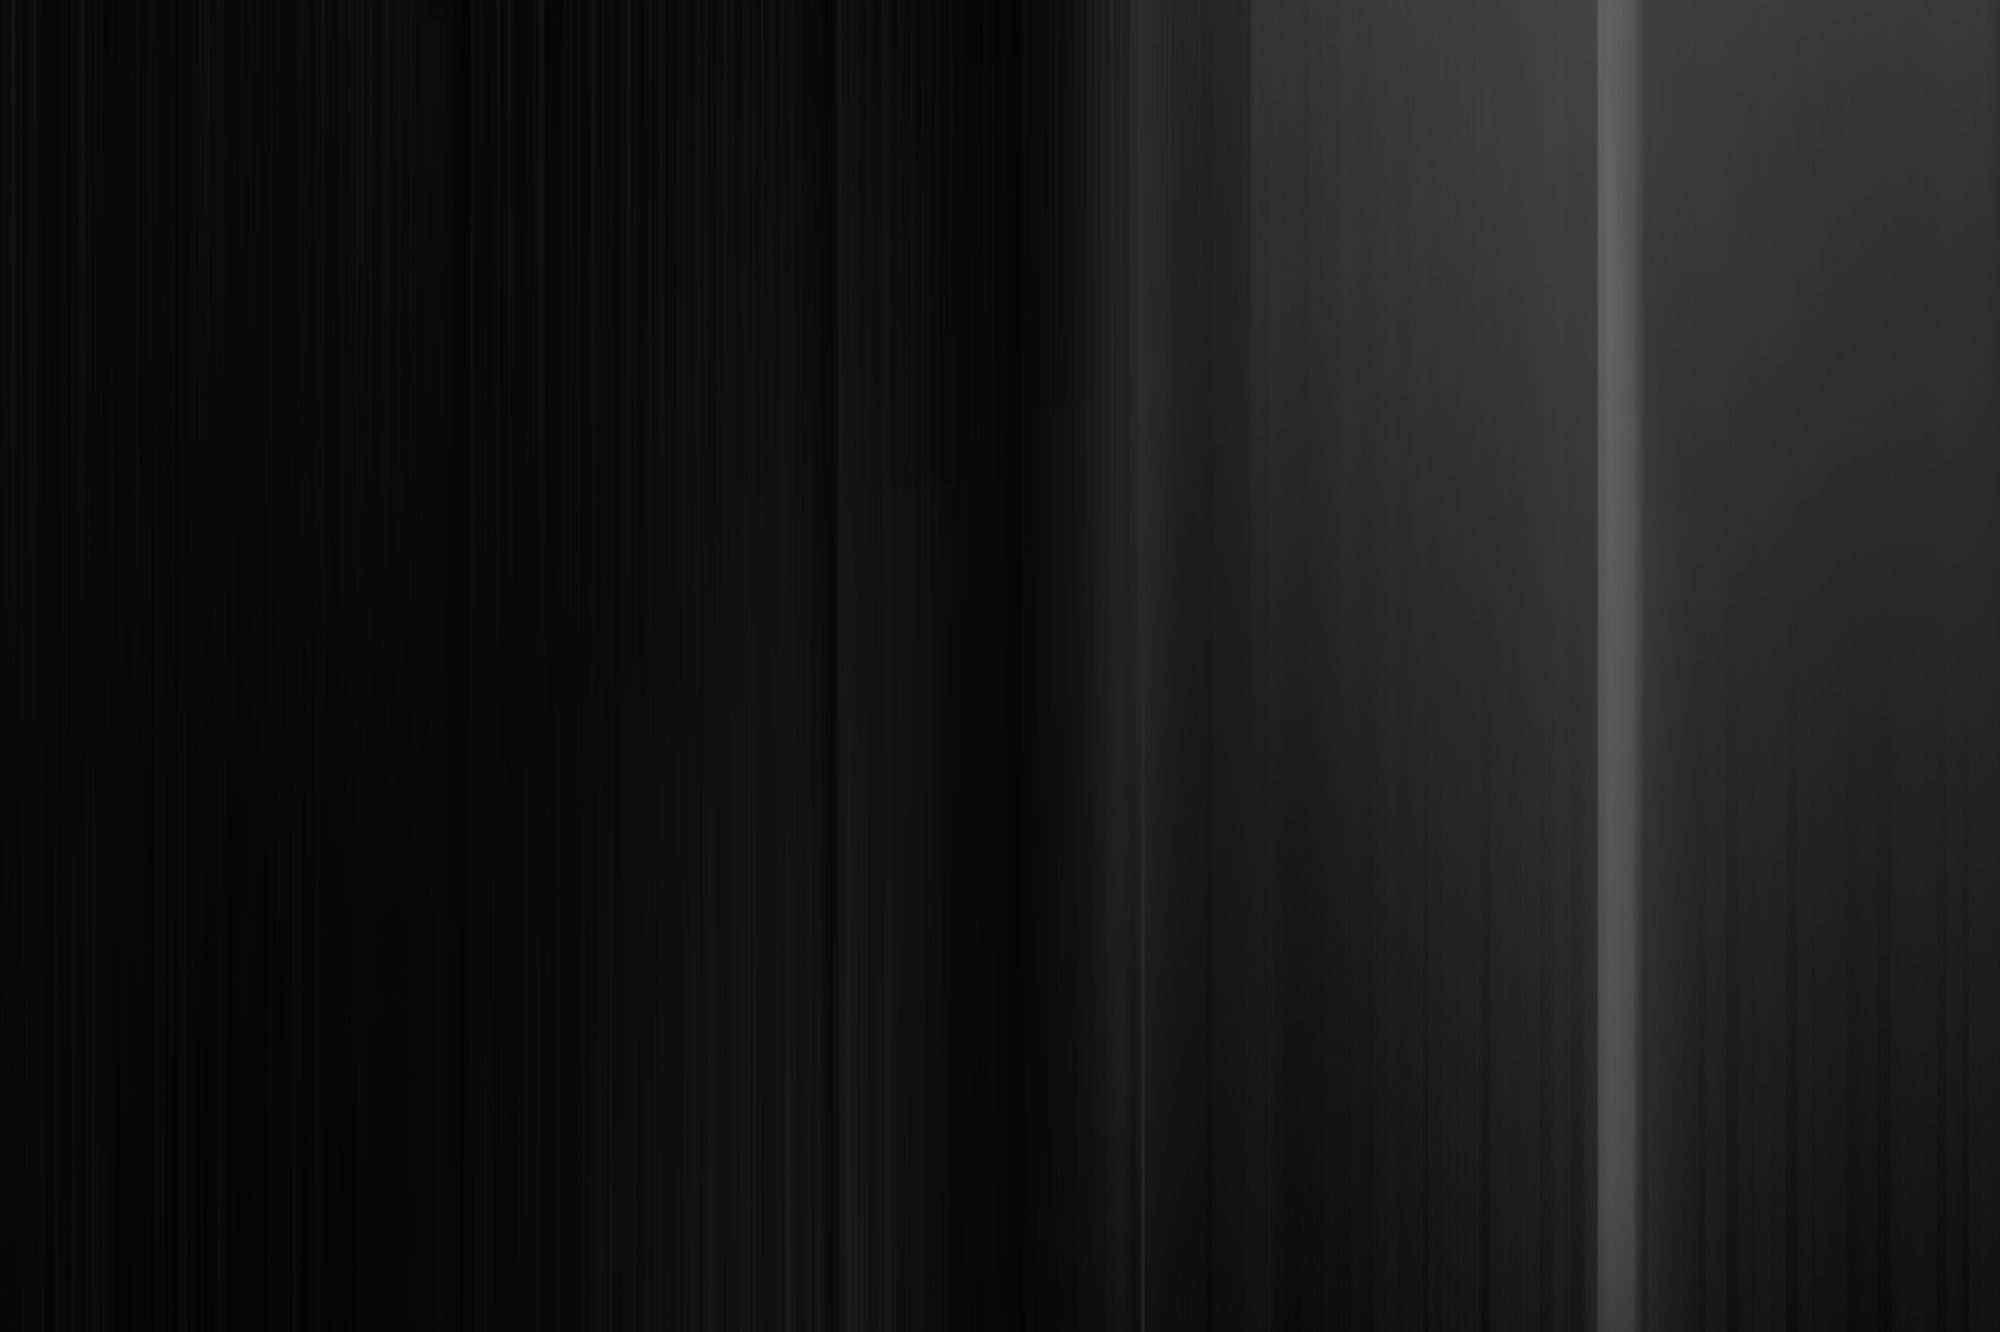 121183 download wallpaper dark, streaks, background, textures, shine, light, texture, shadow, stripes screensavers and pictures for free